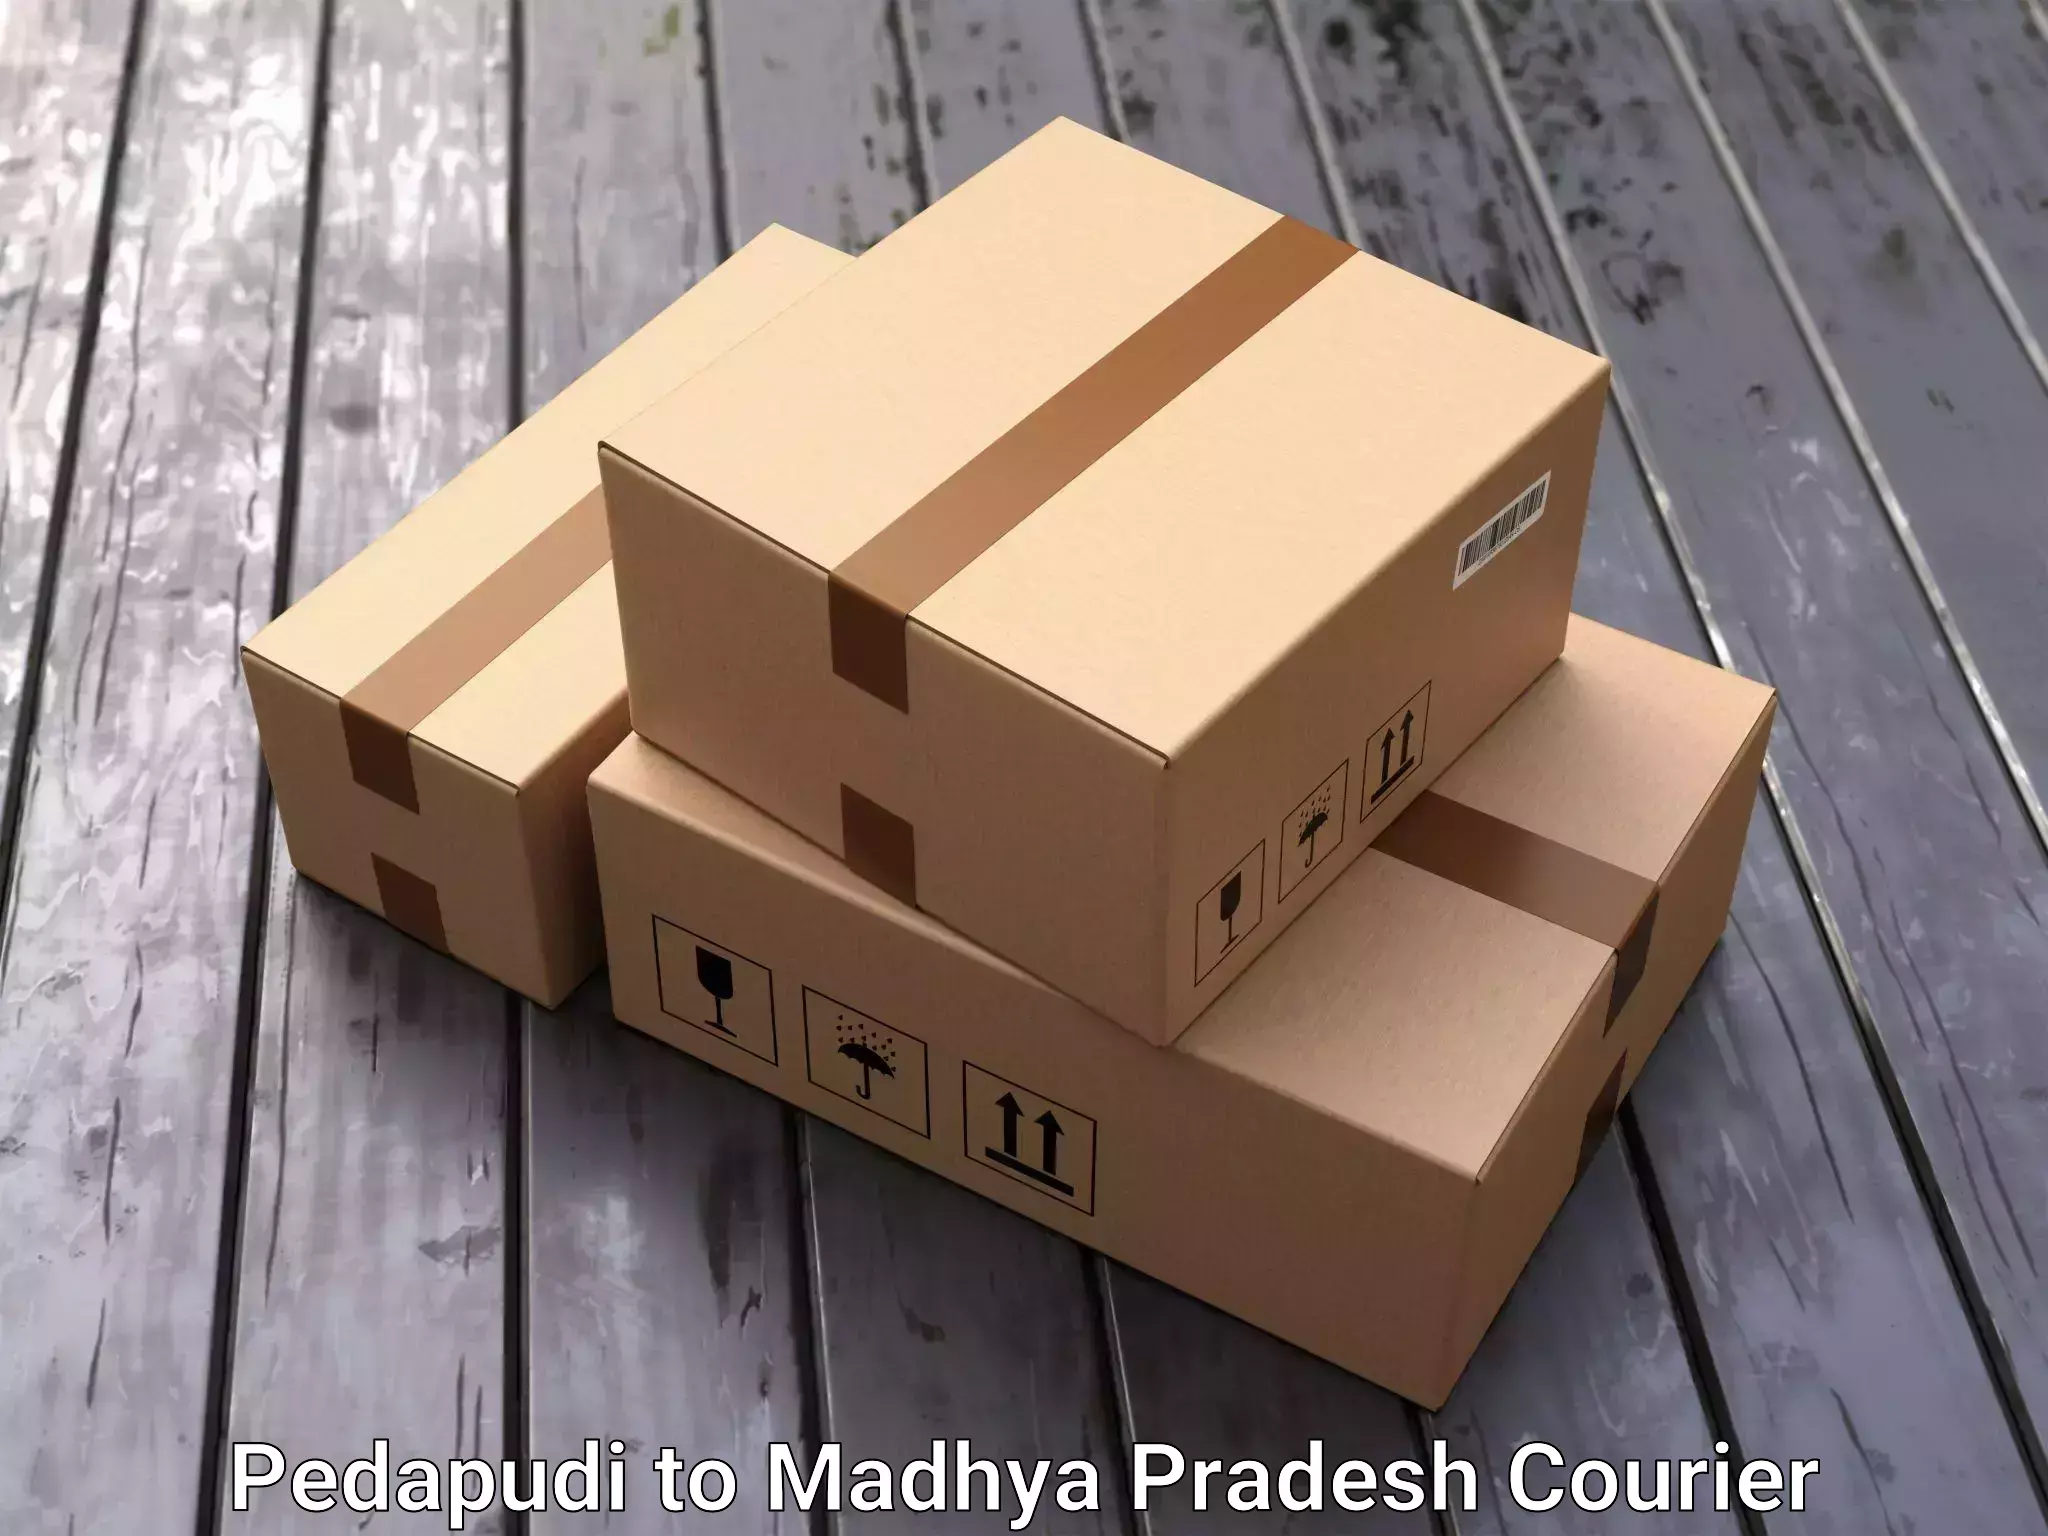 Professional relocation services Pedapudi to Gwalior